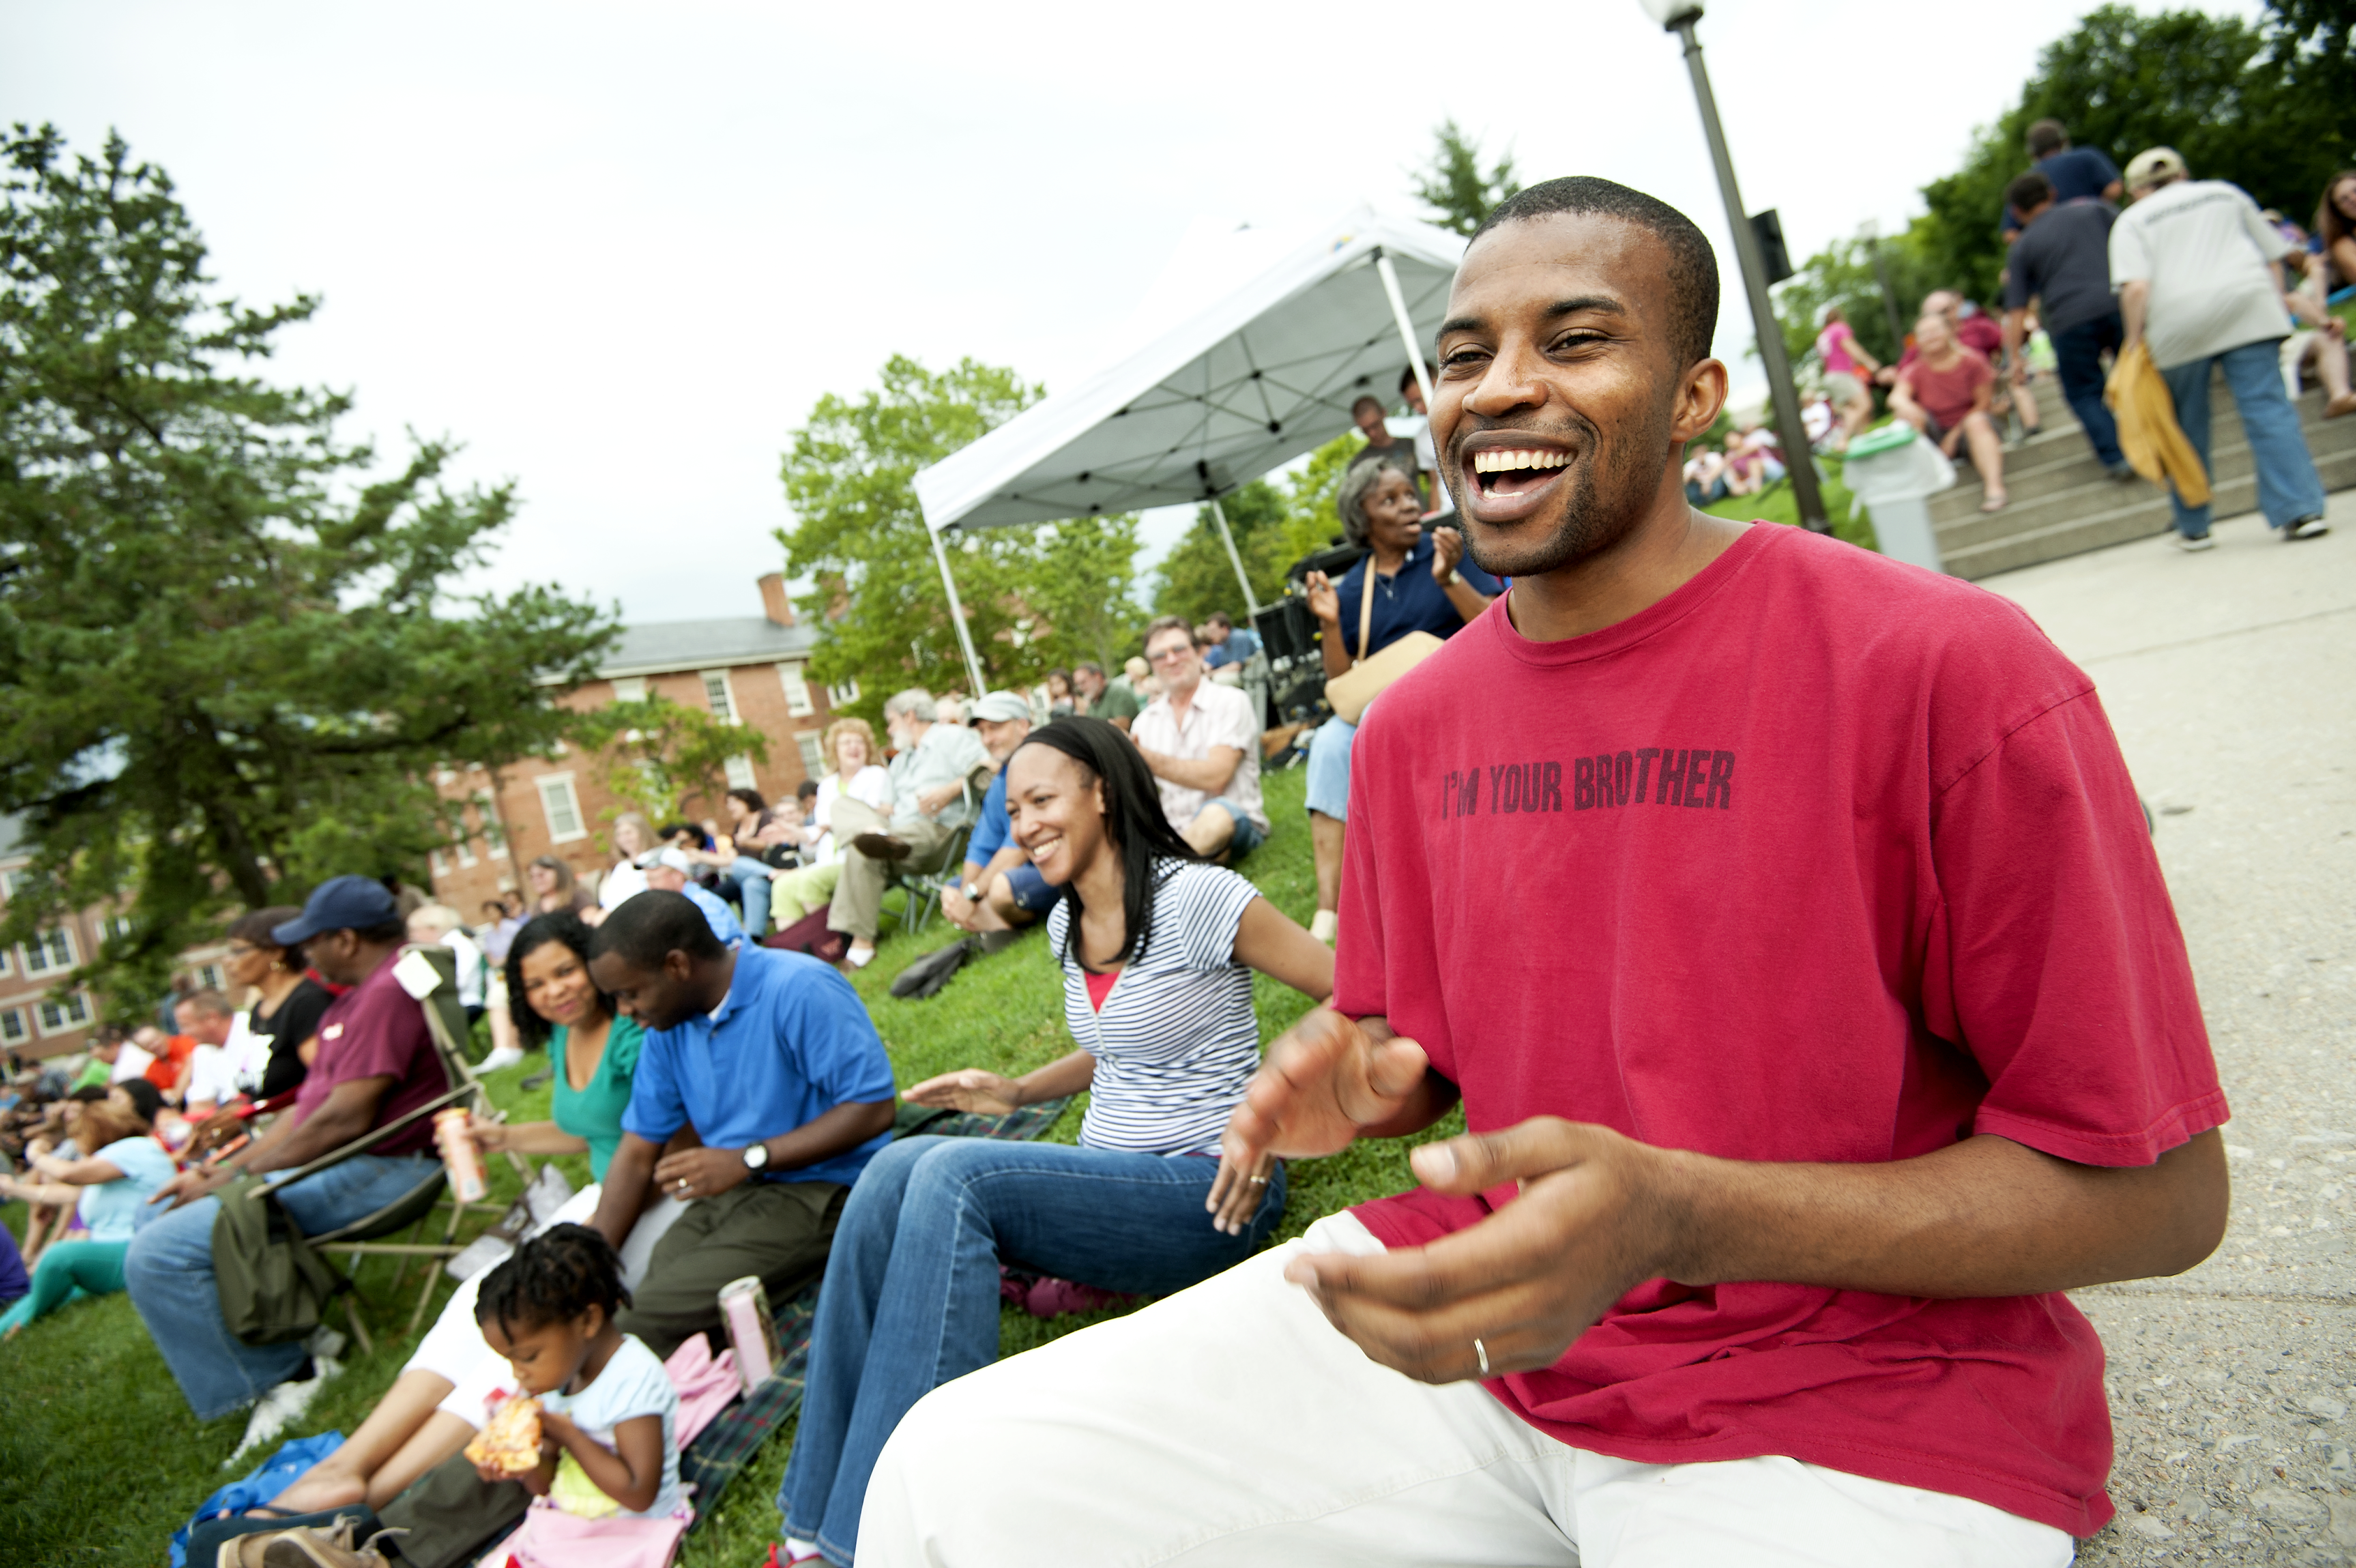 Blacksburg ranked among top '10 Happiest Small Places in America.'